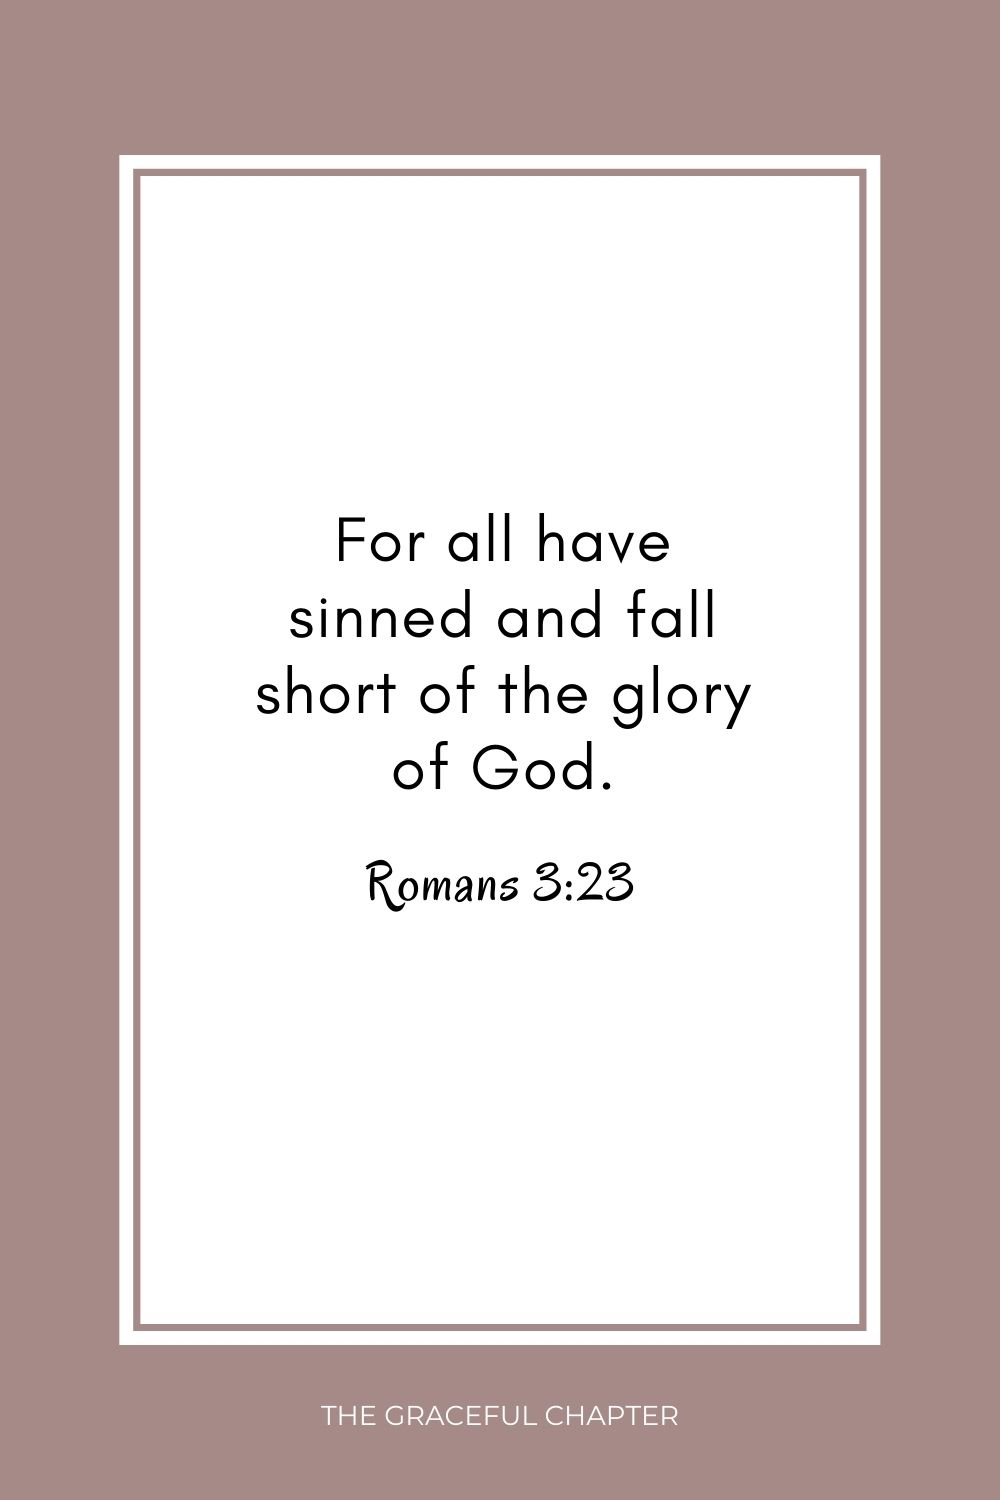 For all have sinned and fall short of the glory of God. Romans 3:23